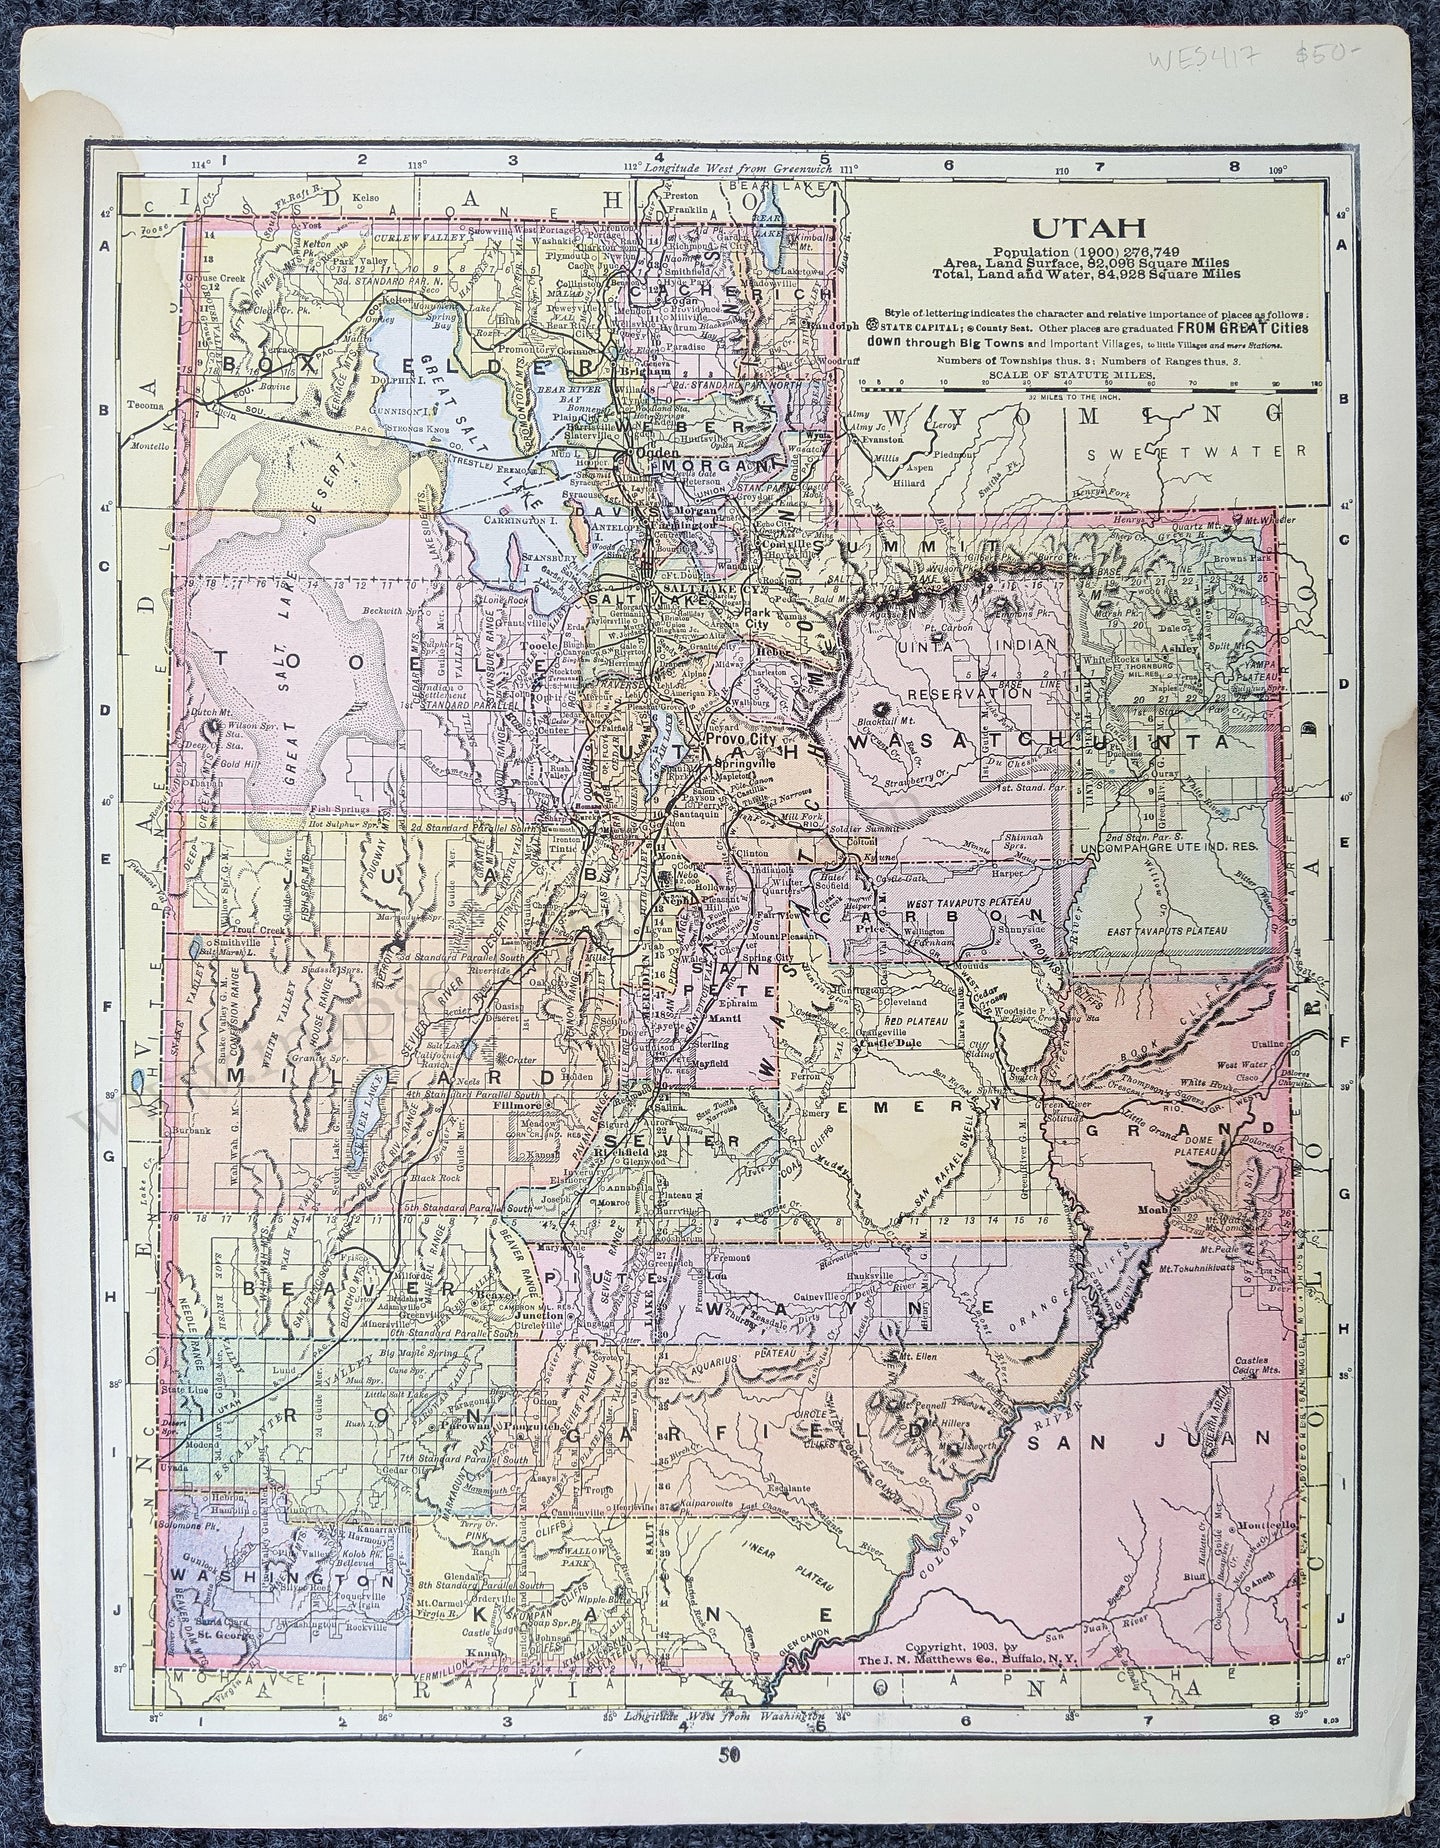 Genuine-Antique-Map-Map-of-Utah-verso:-Map-of-Montana-United-States-West-1903-The-J.N.-Matthews-Co.-/-Mast-Crowell-&-Kirkpatrick-Maps-Of-Antiquity-1800s-19th-century